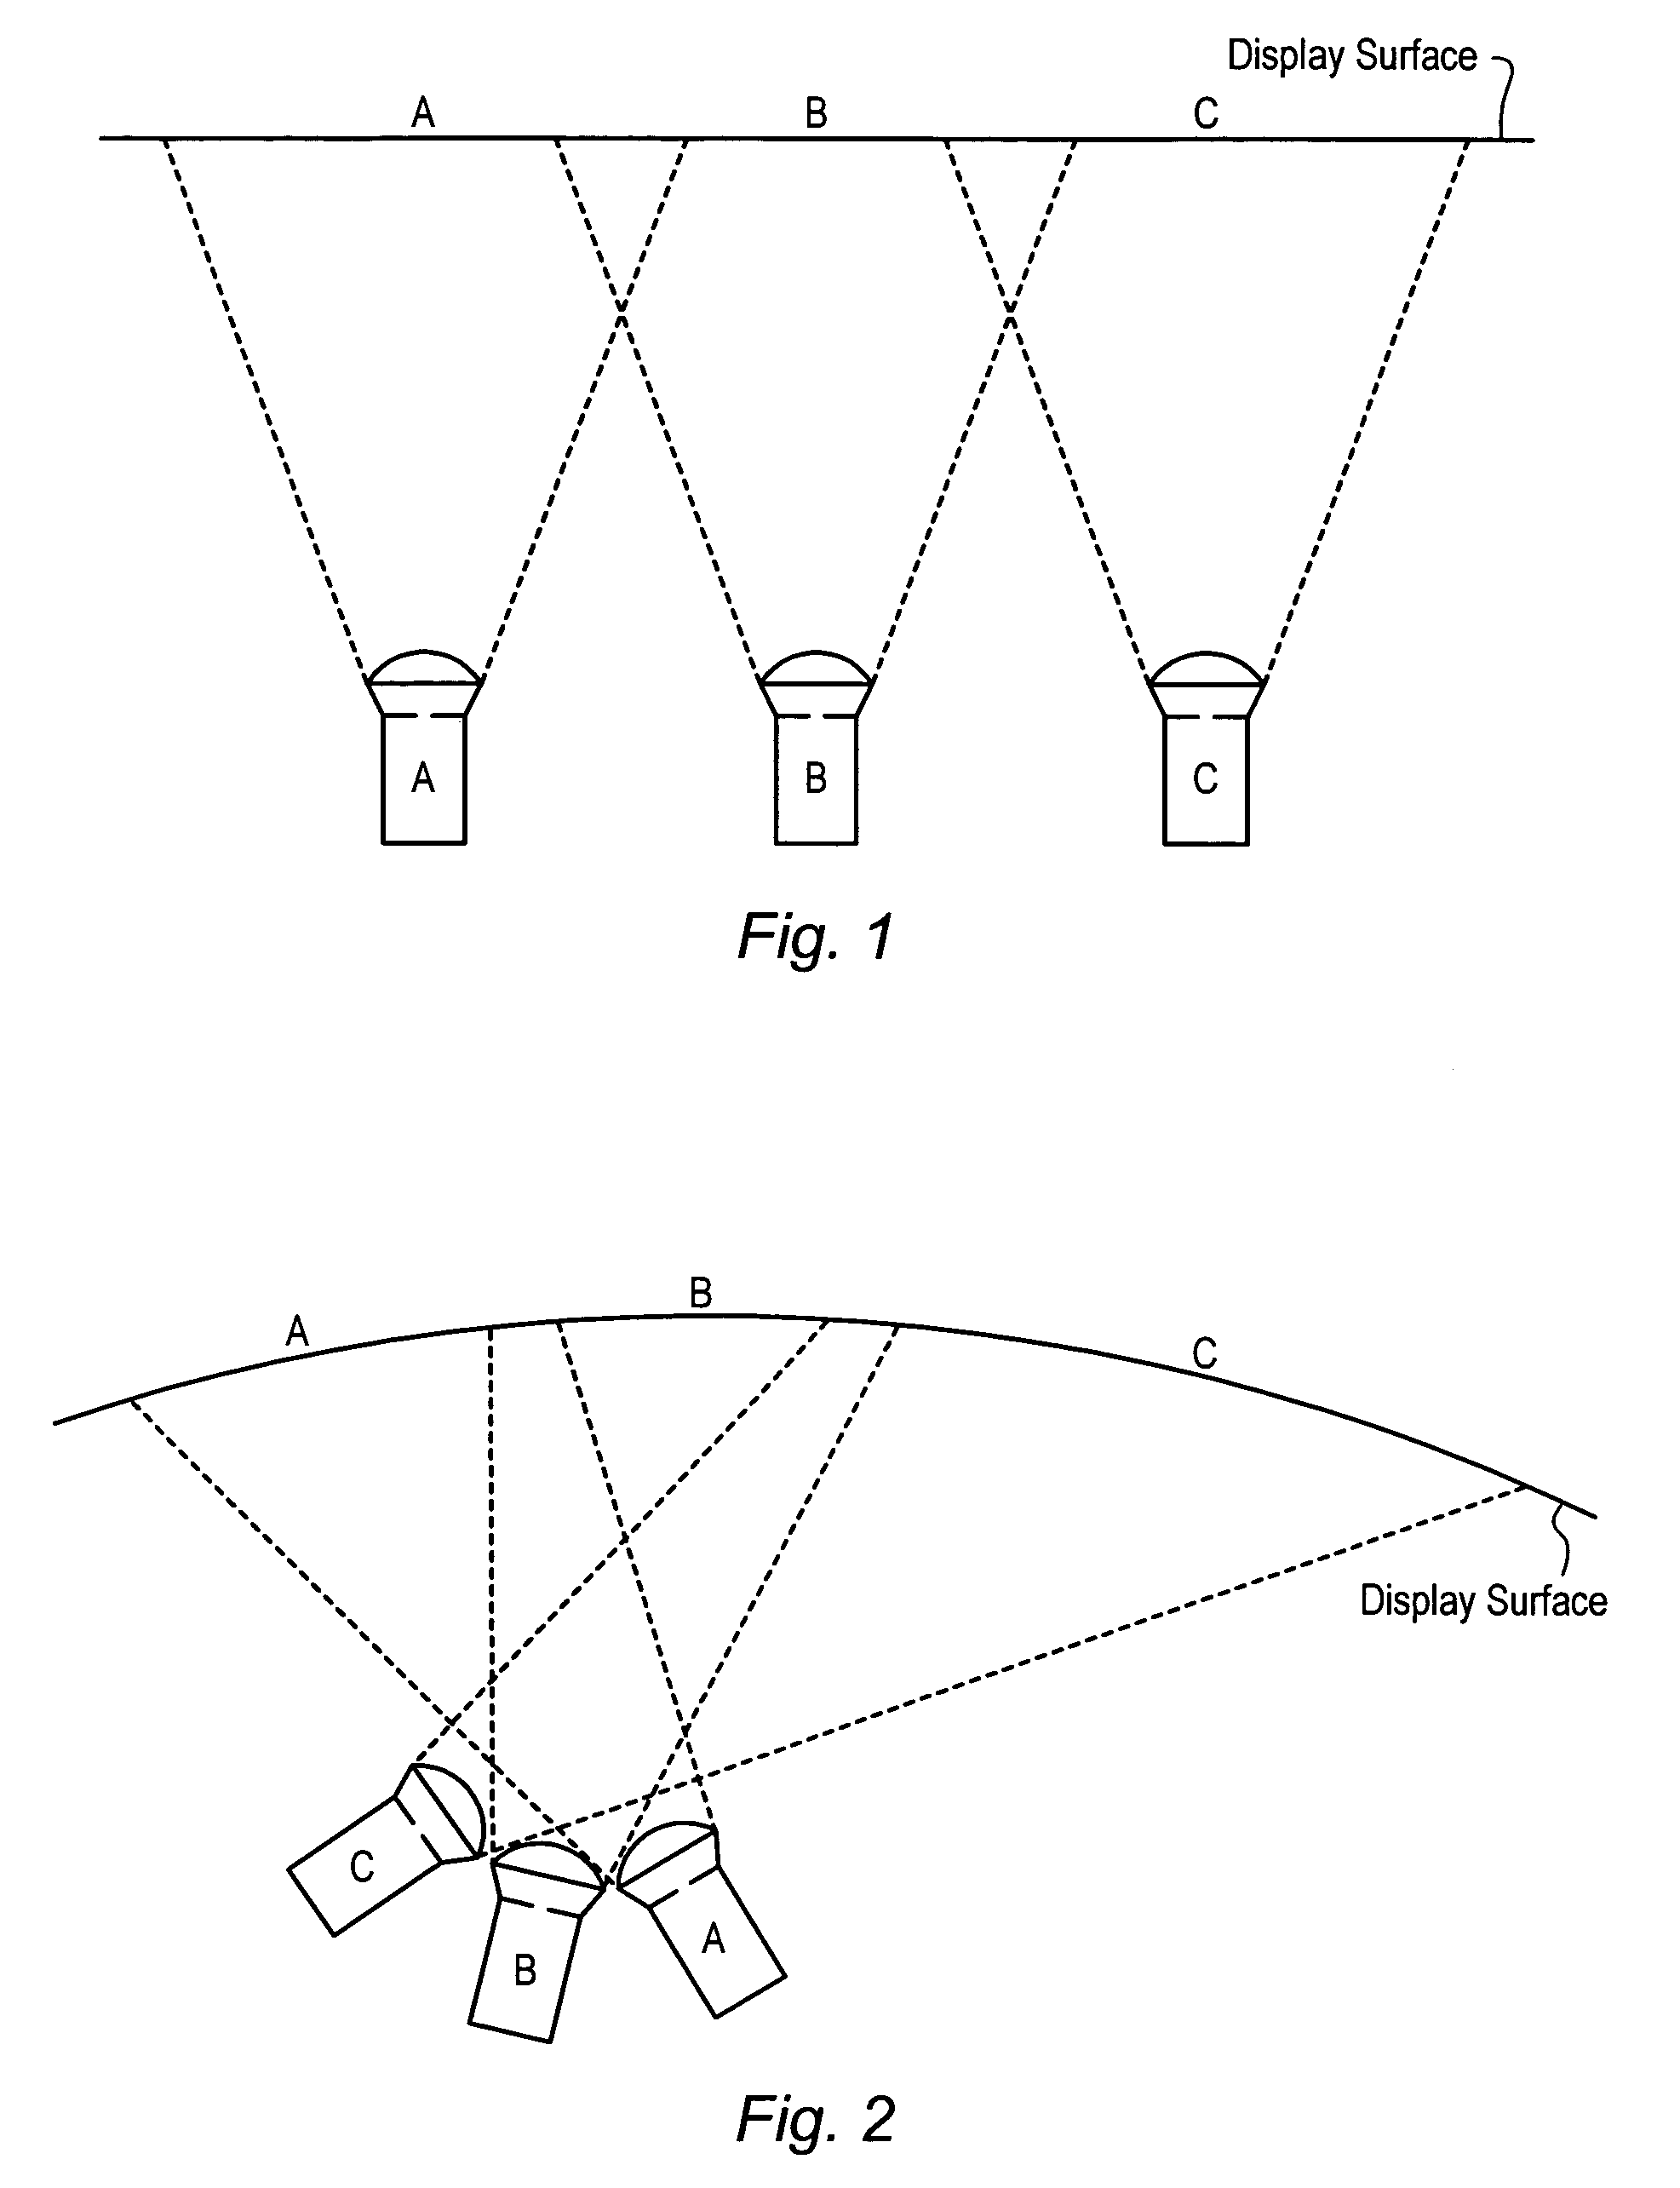 Computing blending functions for the tiling of overlapped video projectors